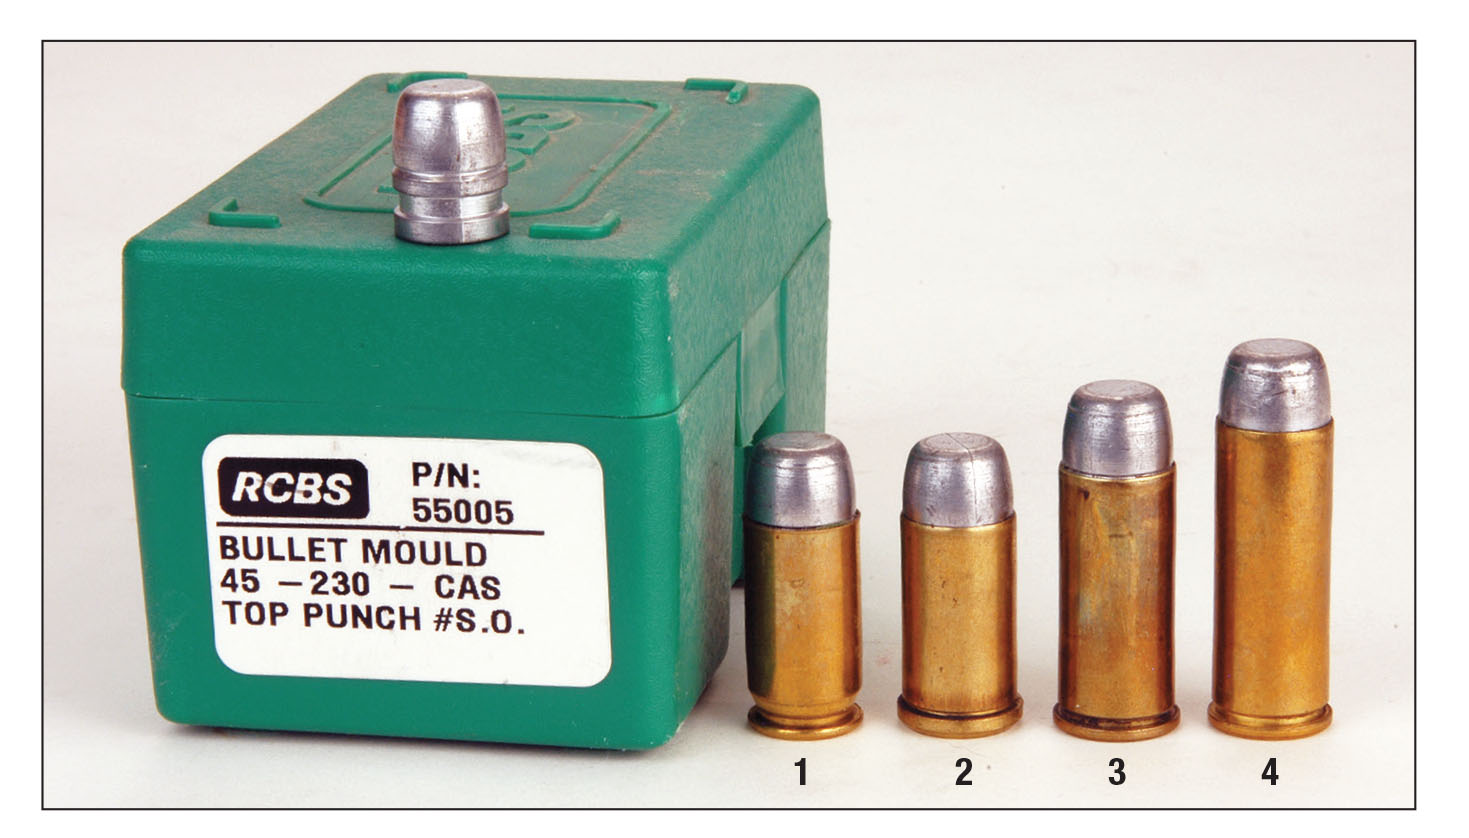 Mike has had good luck loading all types of .45 cartridges with this RCBS mould. The loaded rounds are: (1) .45 ACP,  (2) .45 Auto-Rim, (3) .45 S&W and (4) .45 Colt.